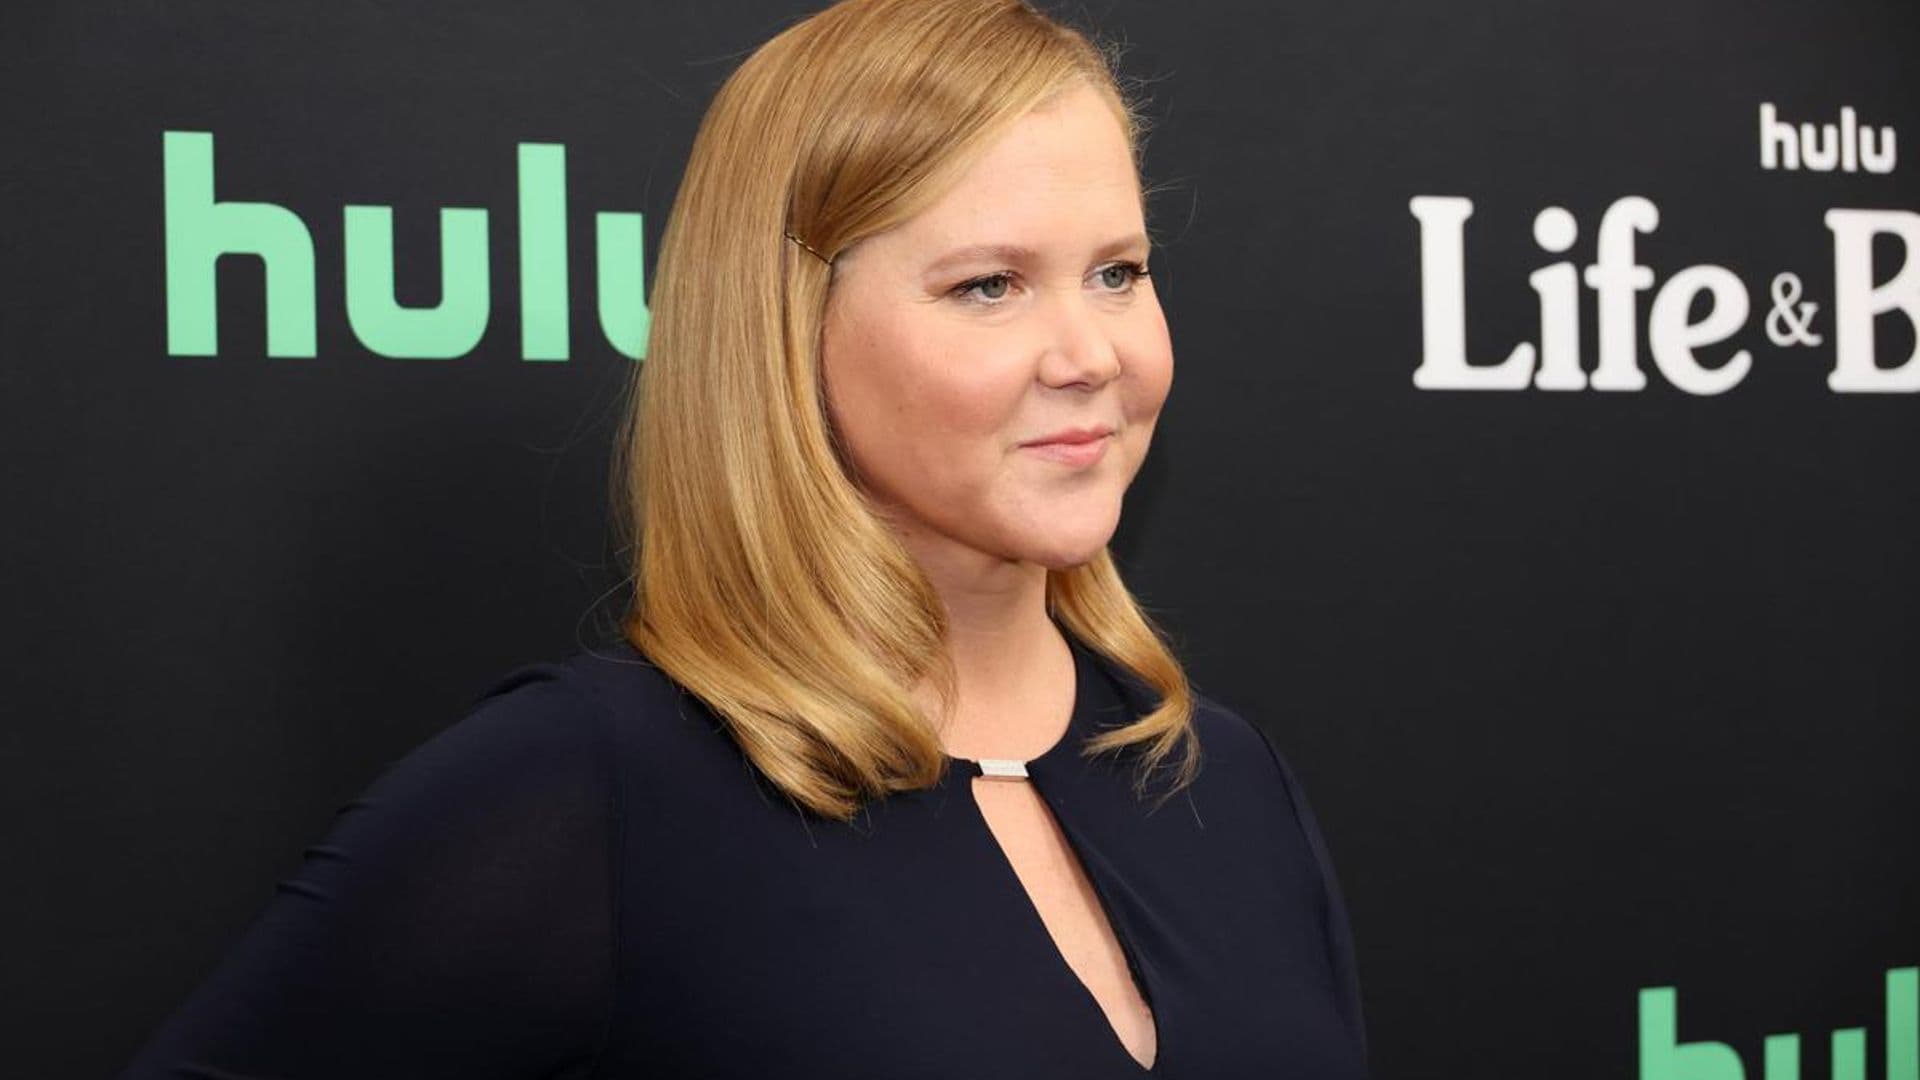 Amy Schumer criticized after insensitive joke about Alec Baldwin’s fatal shooting